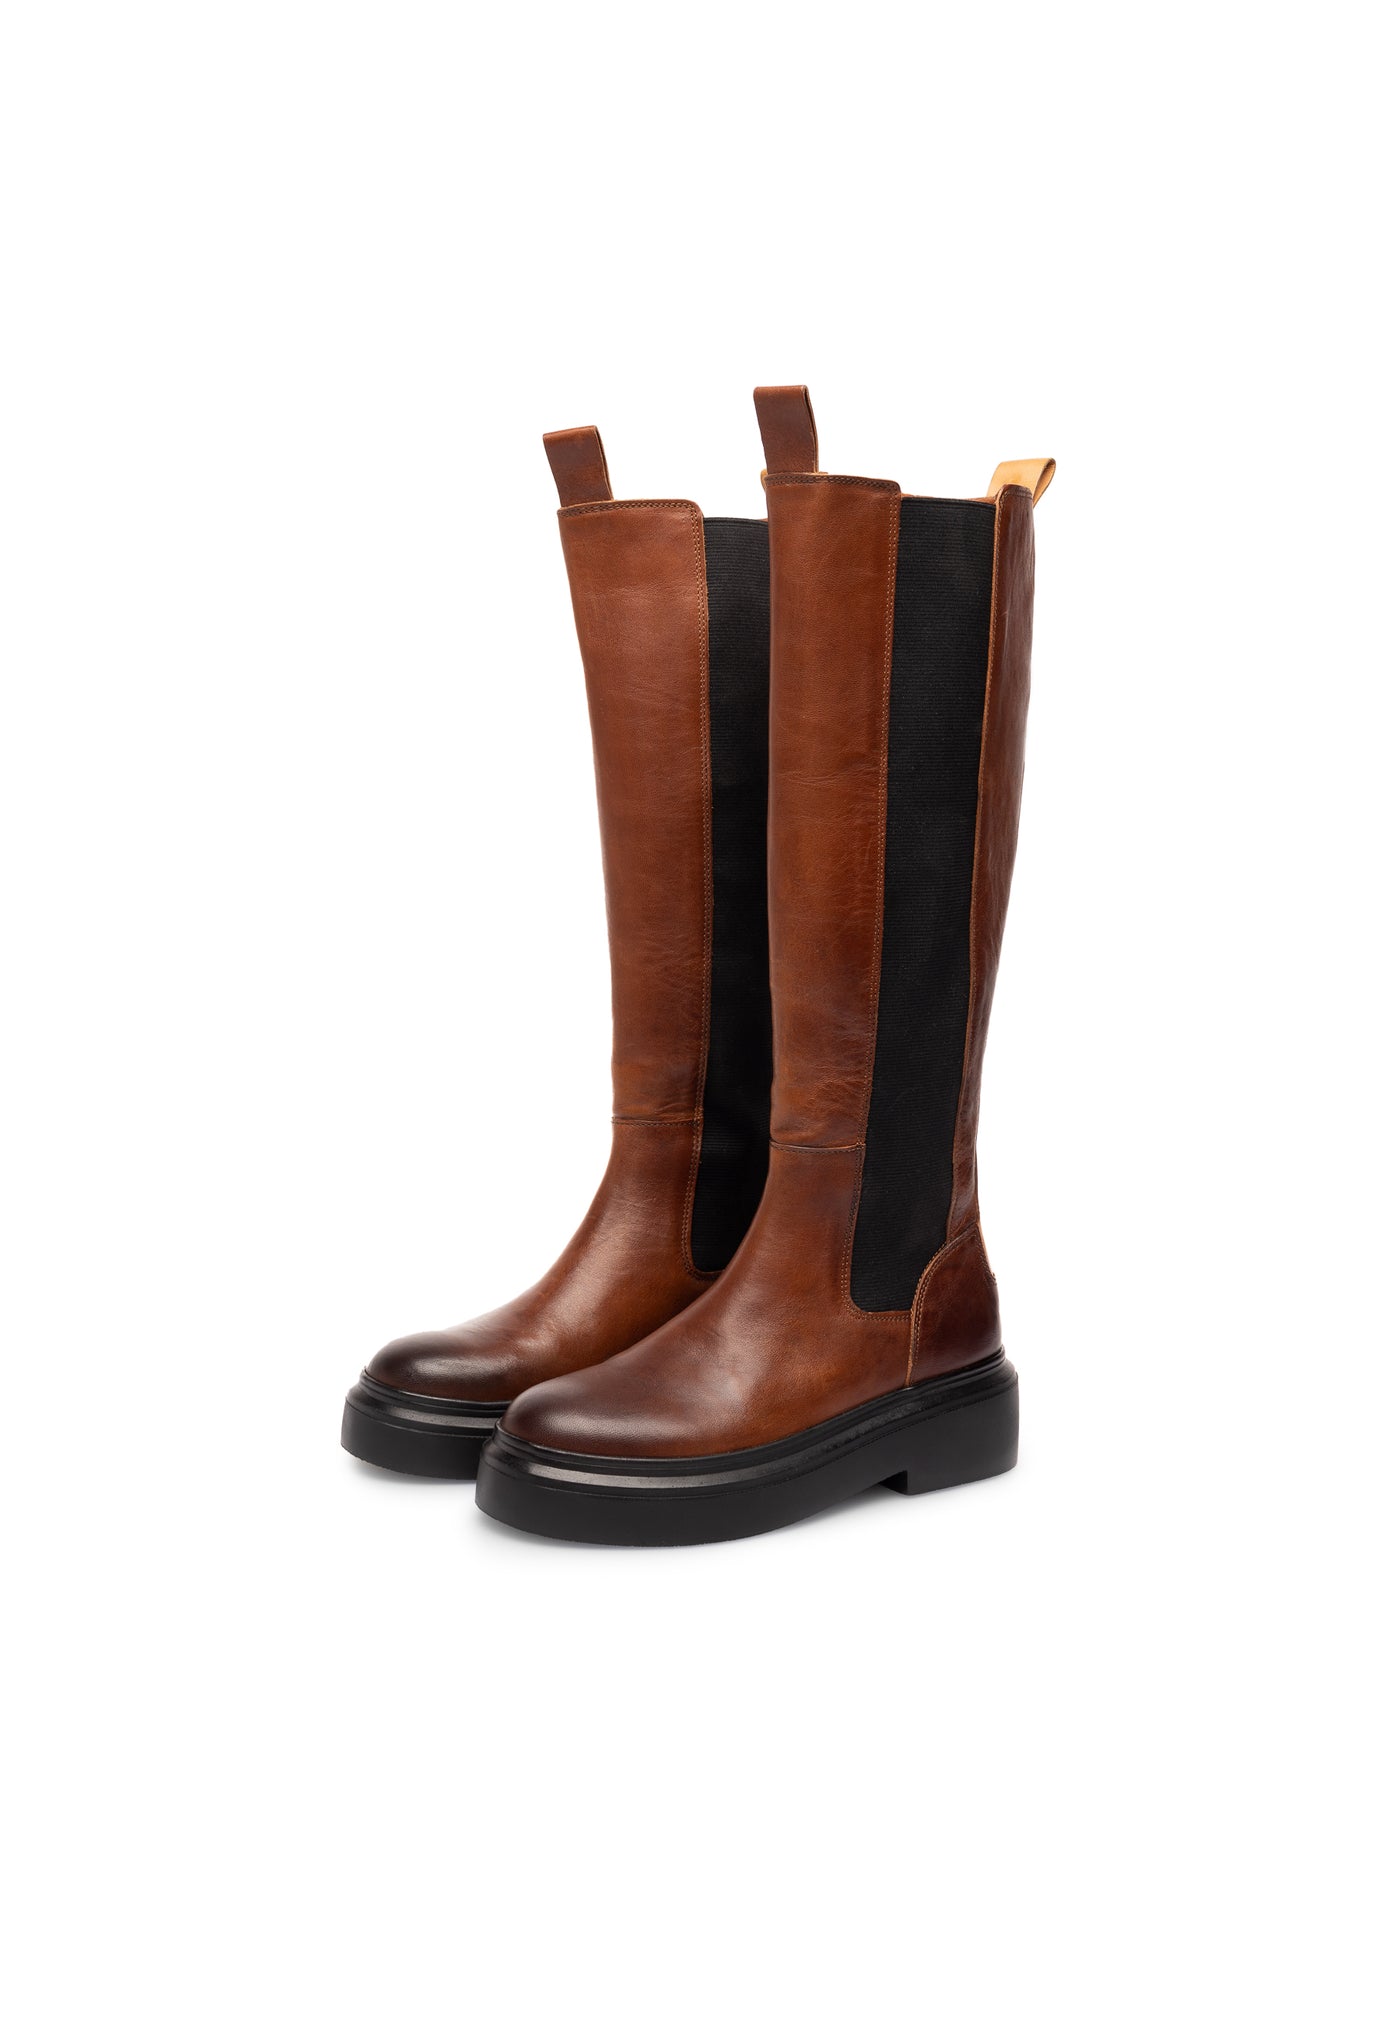 CASHOTT CASKAMMA Tall Boot with Elastic Leather Vegetable Tanned High Boots Cognac